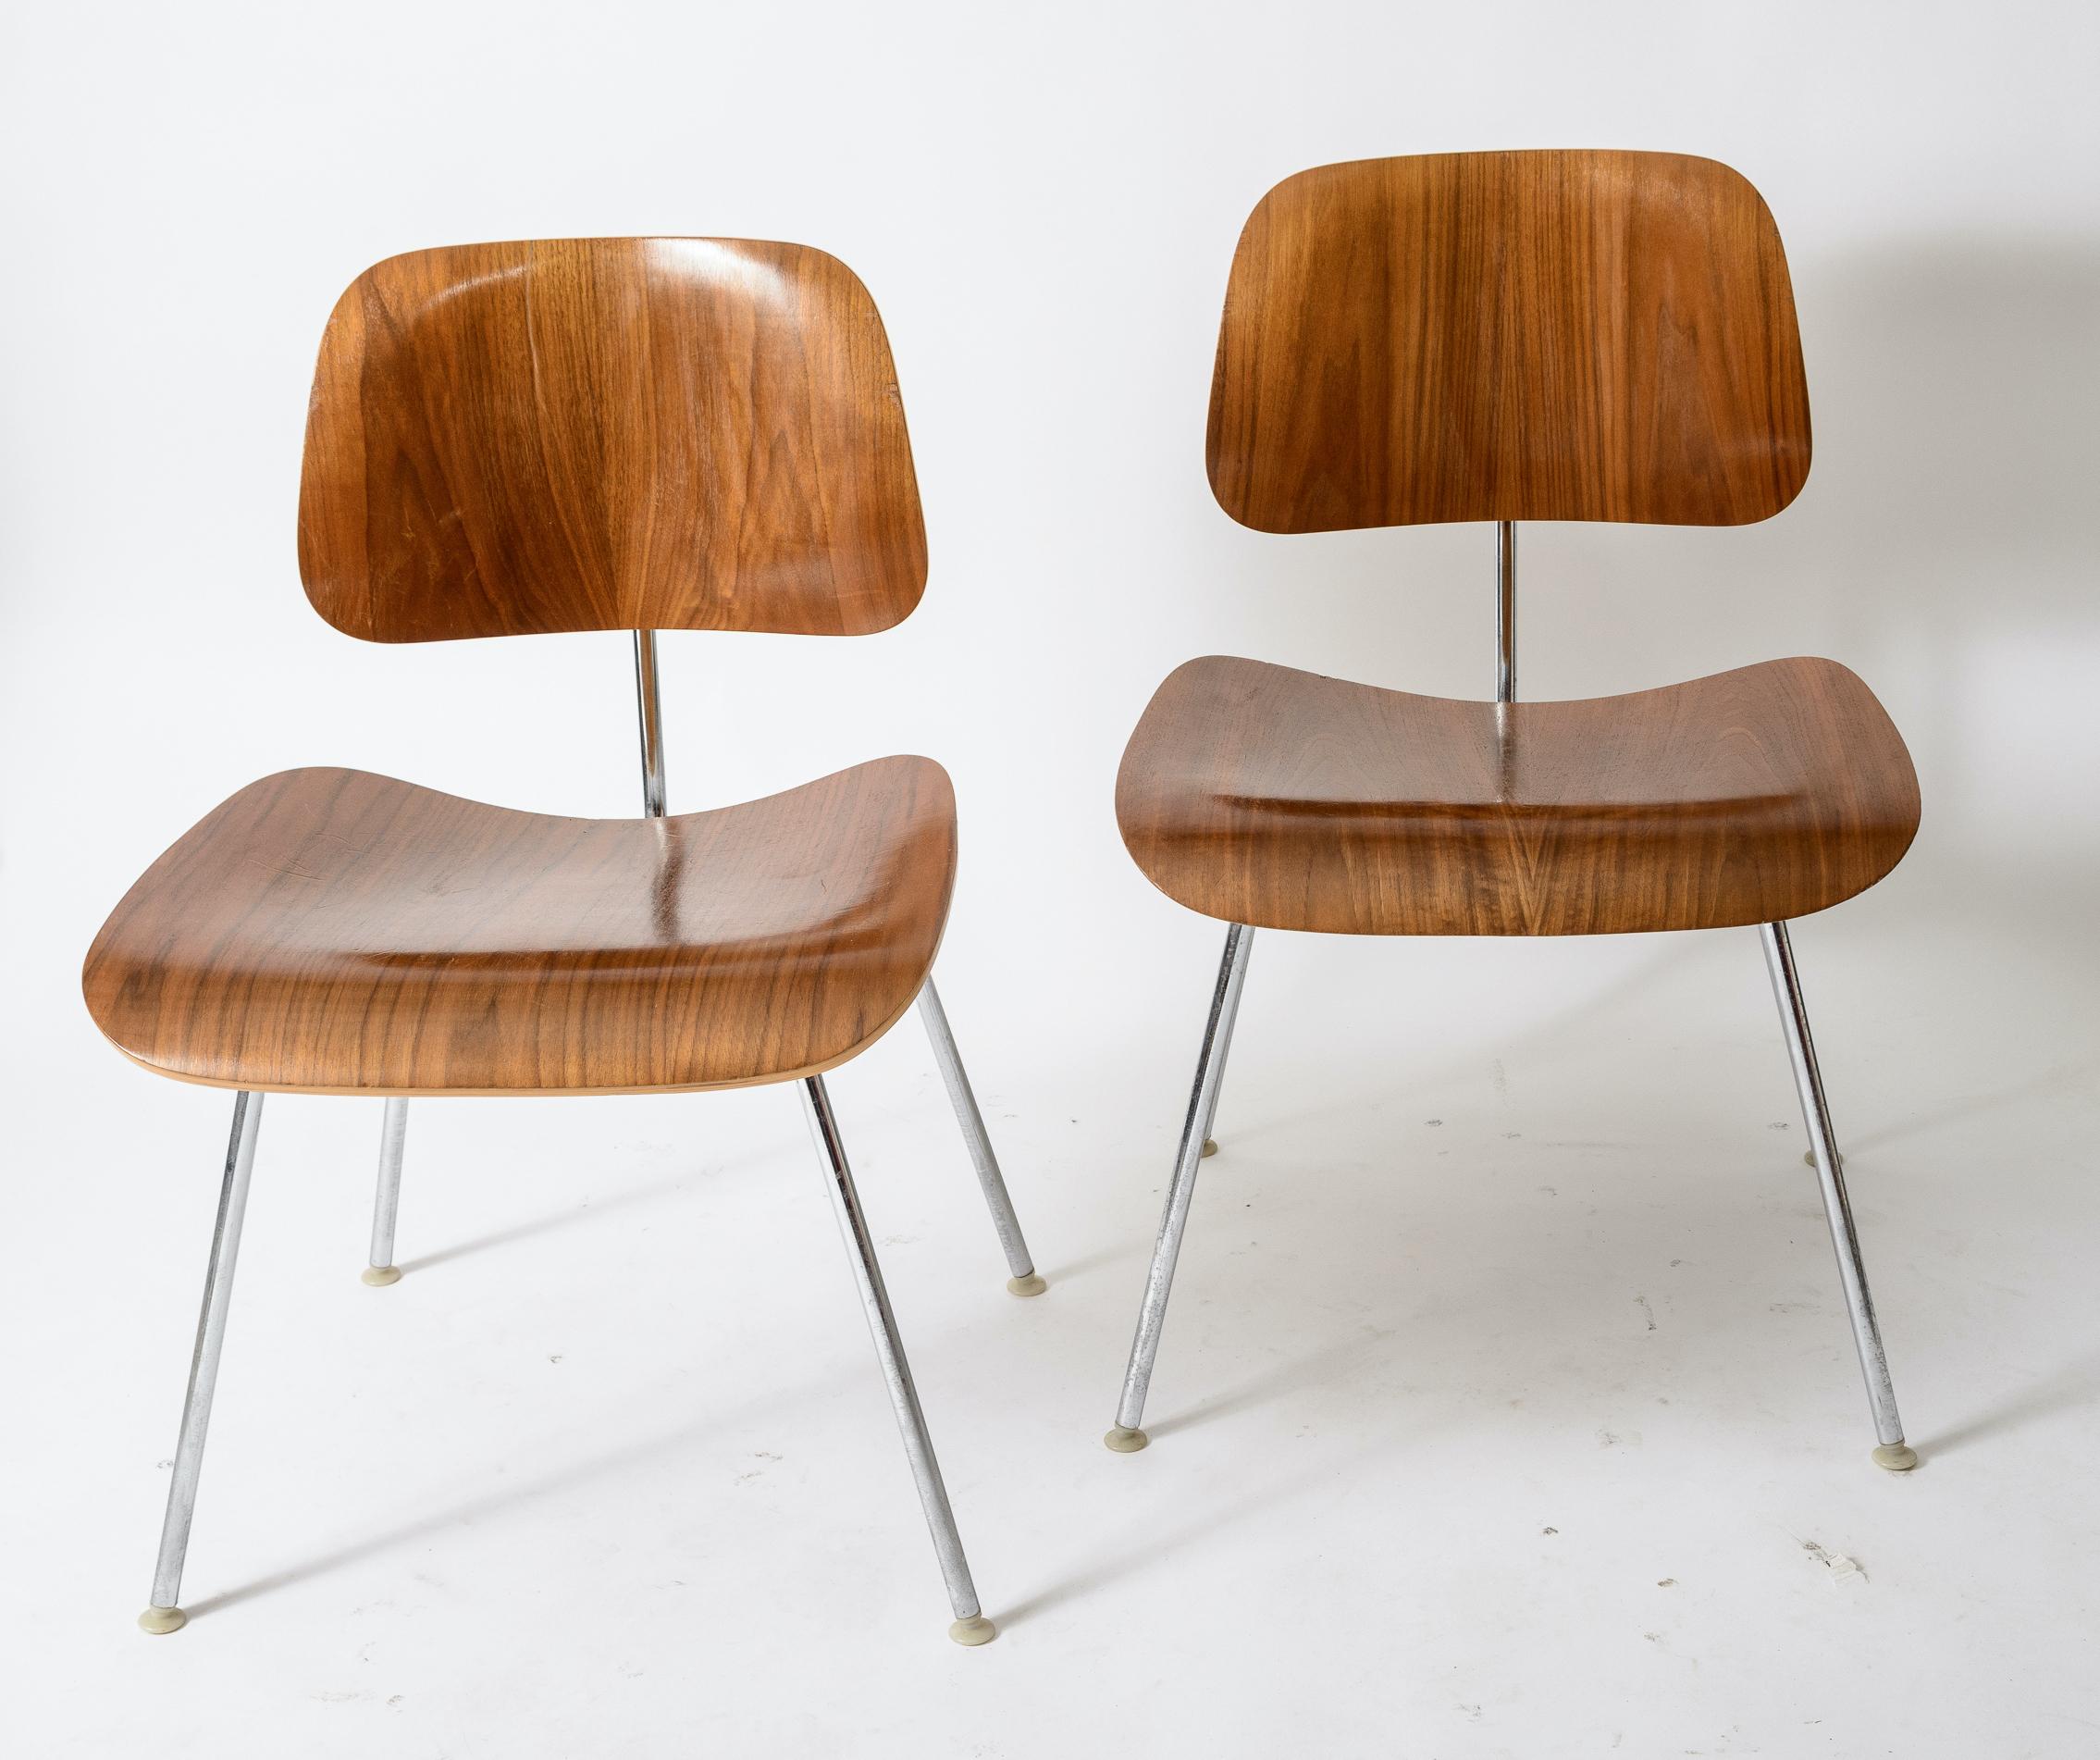 A set of 6 Eames DCM Chairs
Walnut seats and backs
Good Grain pattern
1970s production